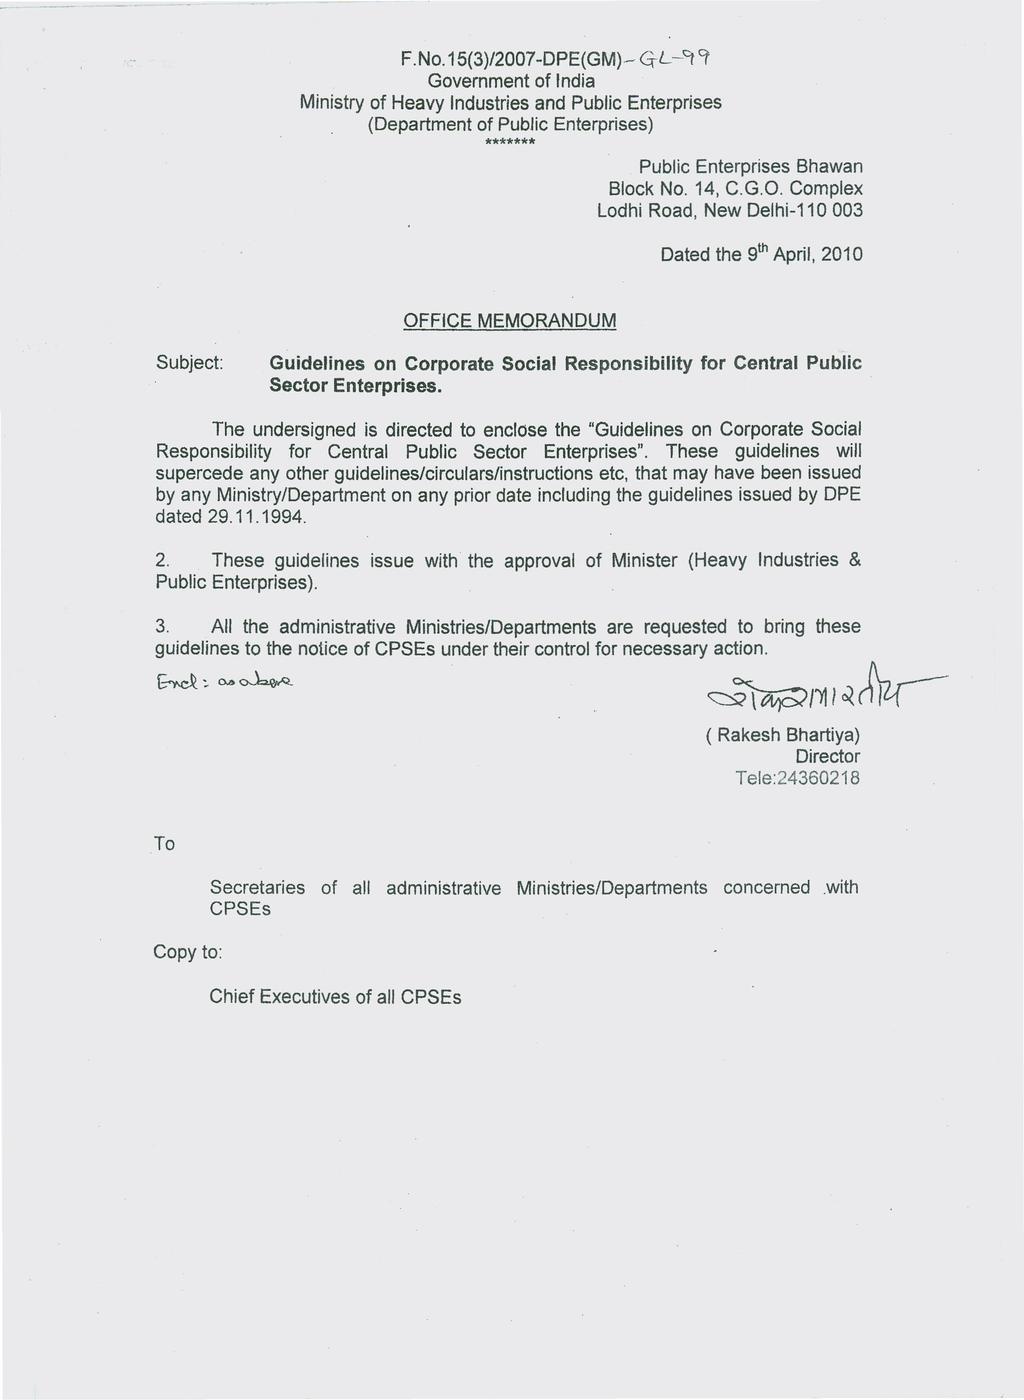 Ministry F. No.15(3)/2007 -DPE(GM)- ~L -~ cr Government of India of Heavy Industries and Public Enterprises (Department of Public Enterprises) ******* Public Enterprises Bhawan Block No. 14, C.G.O.